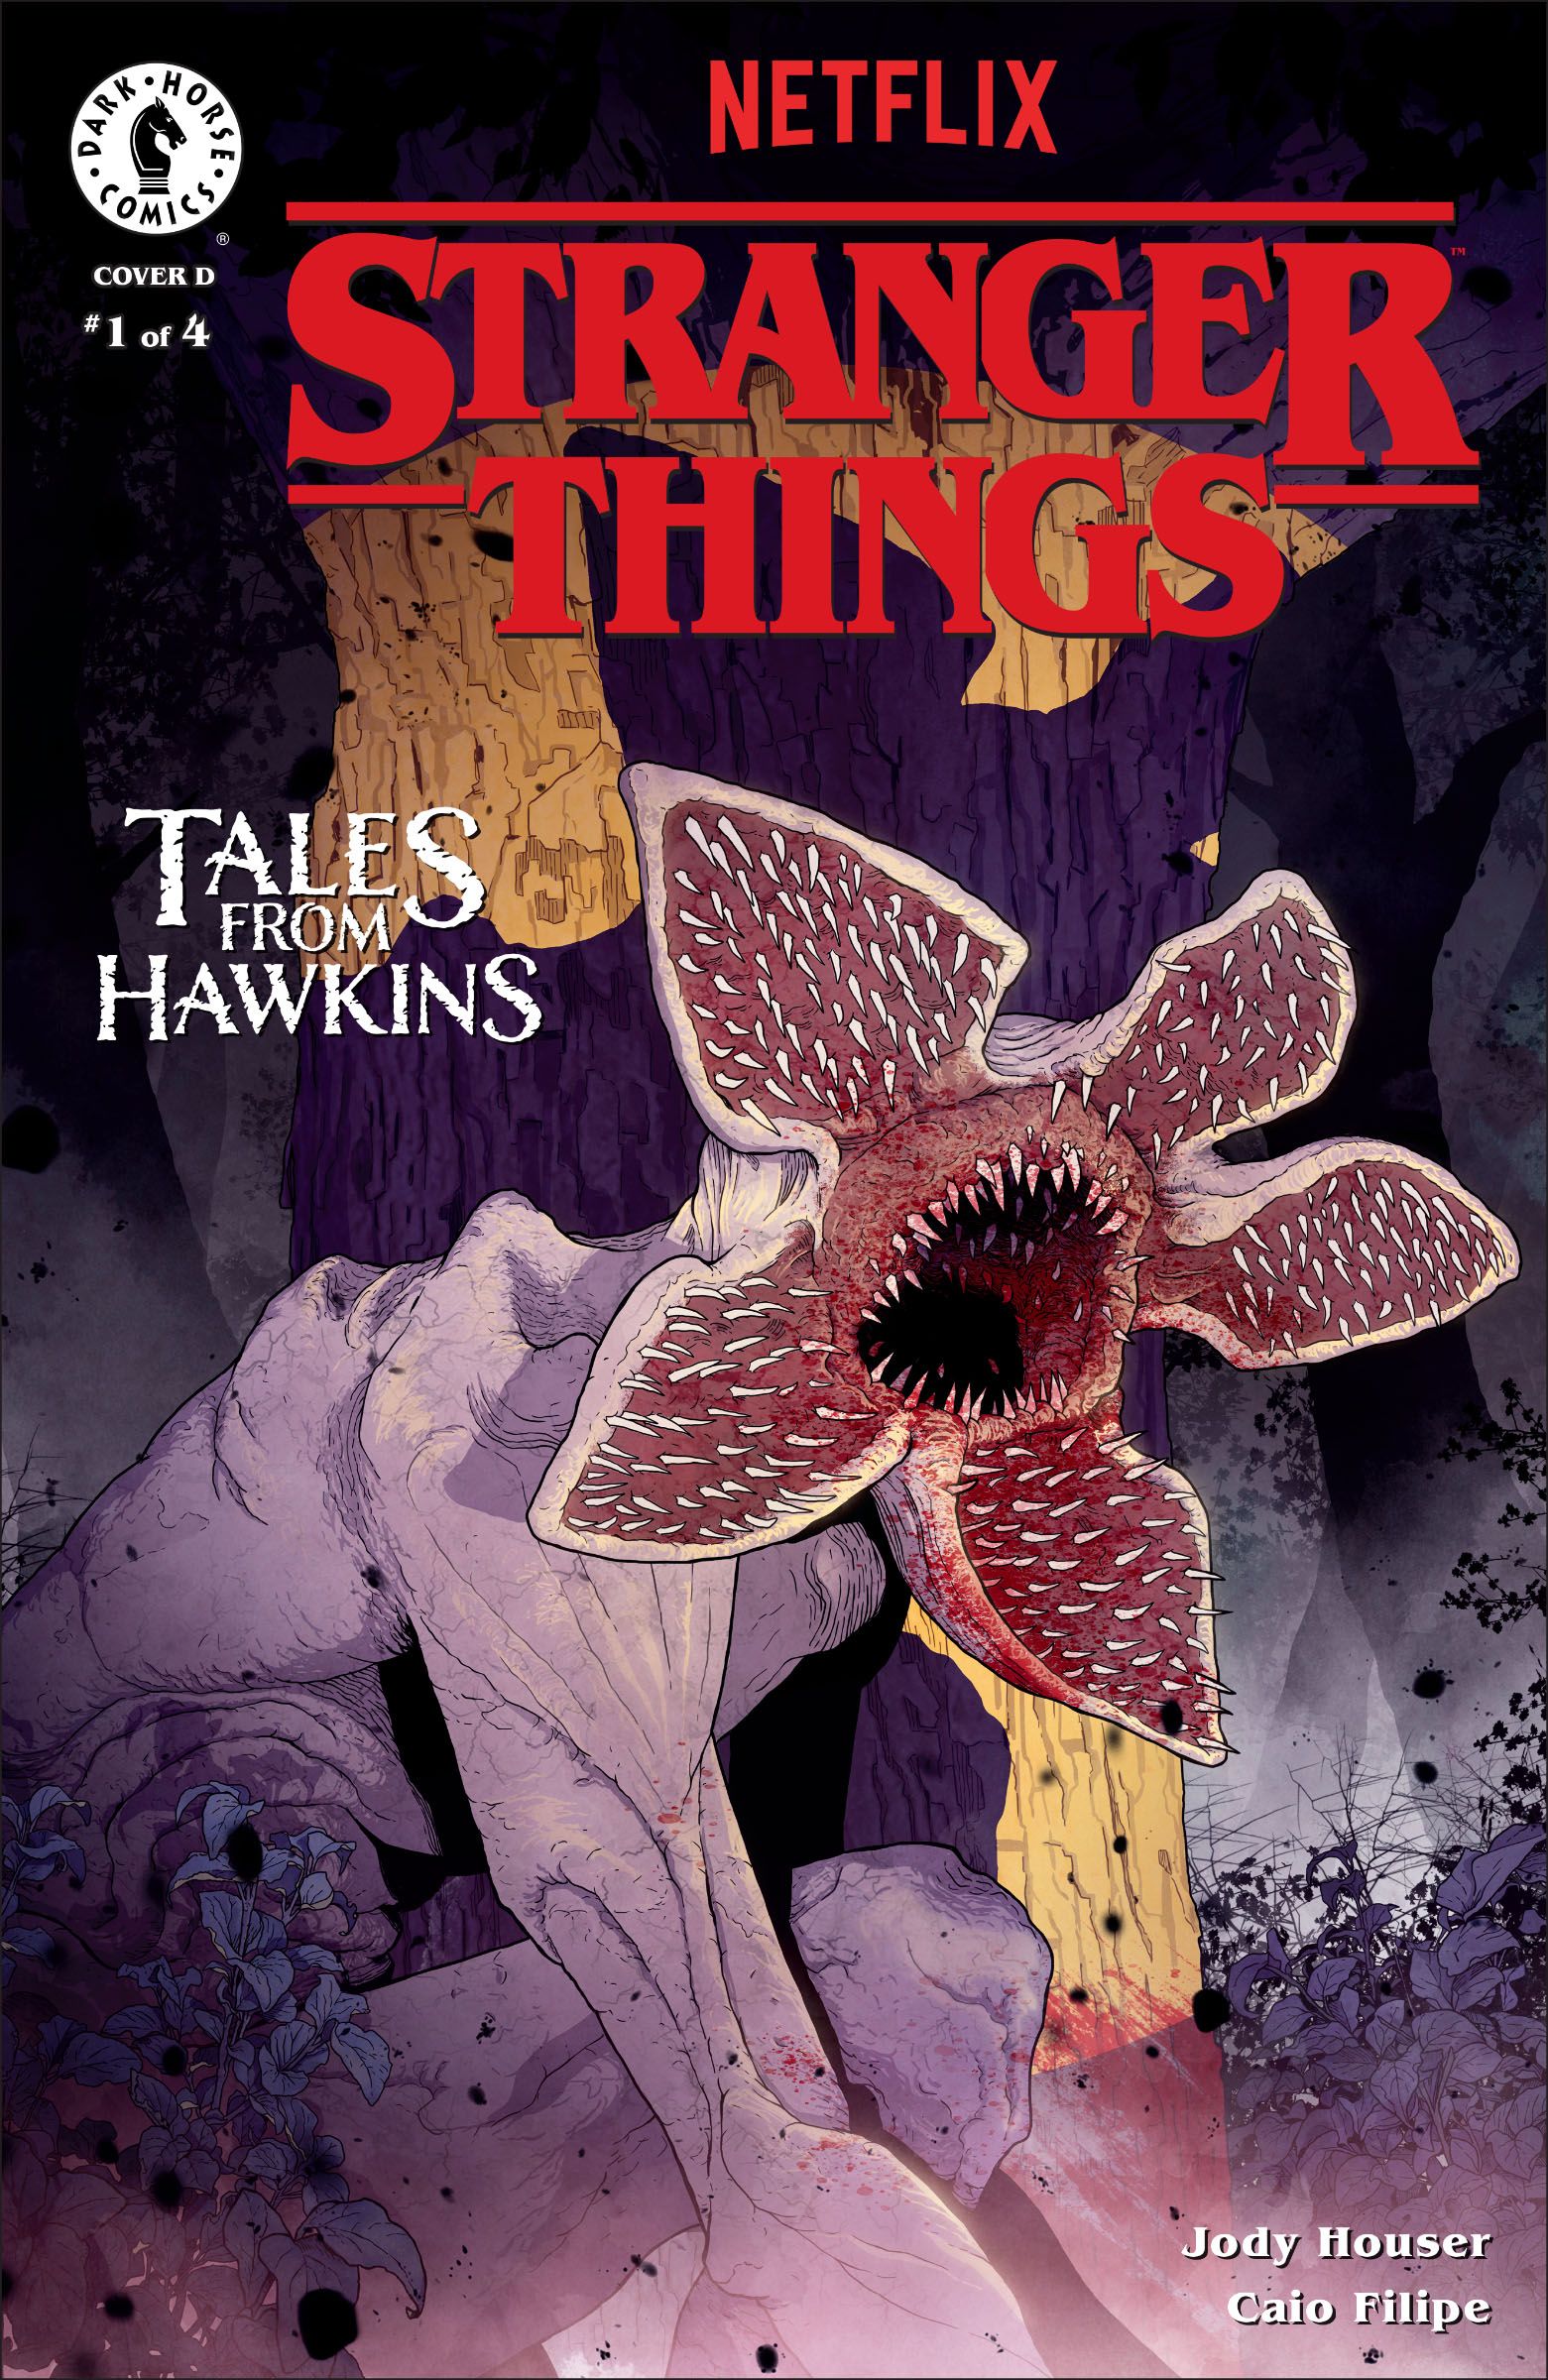 Dark Horse Cancels Strangers Things: Many Ghosts Of Dr Brenner Orders